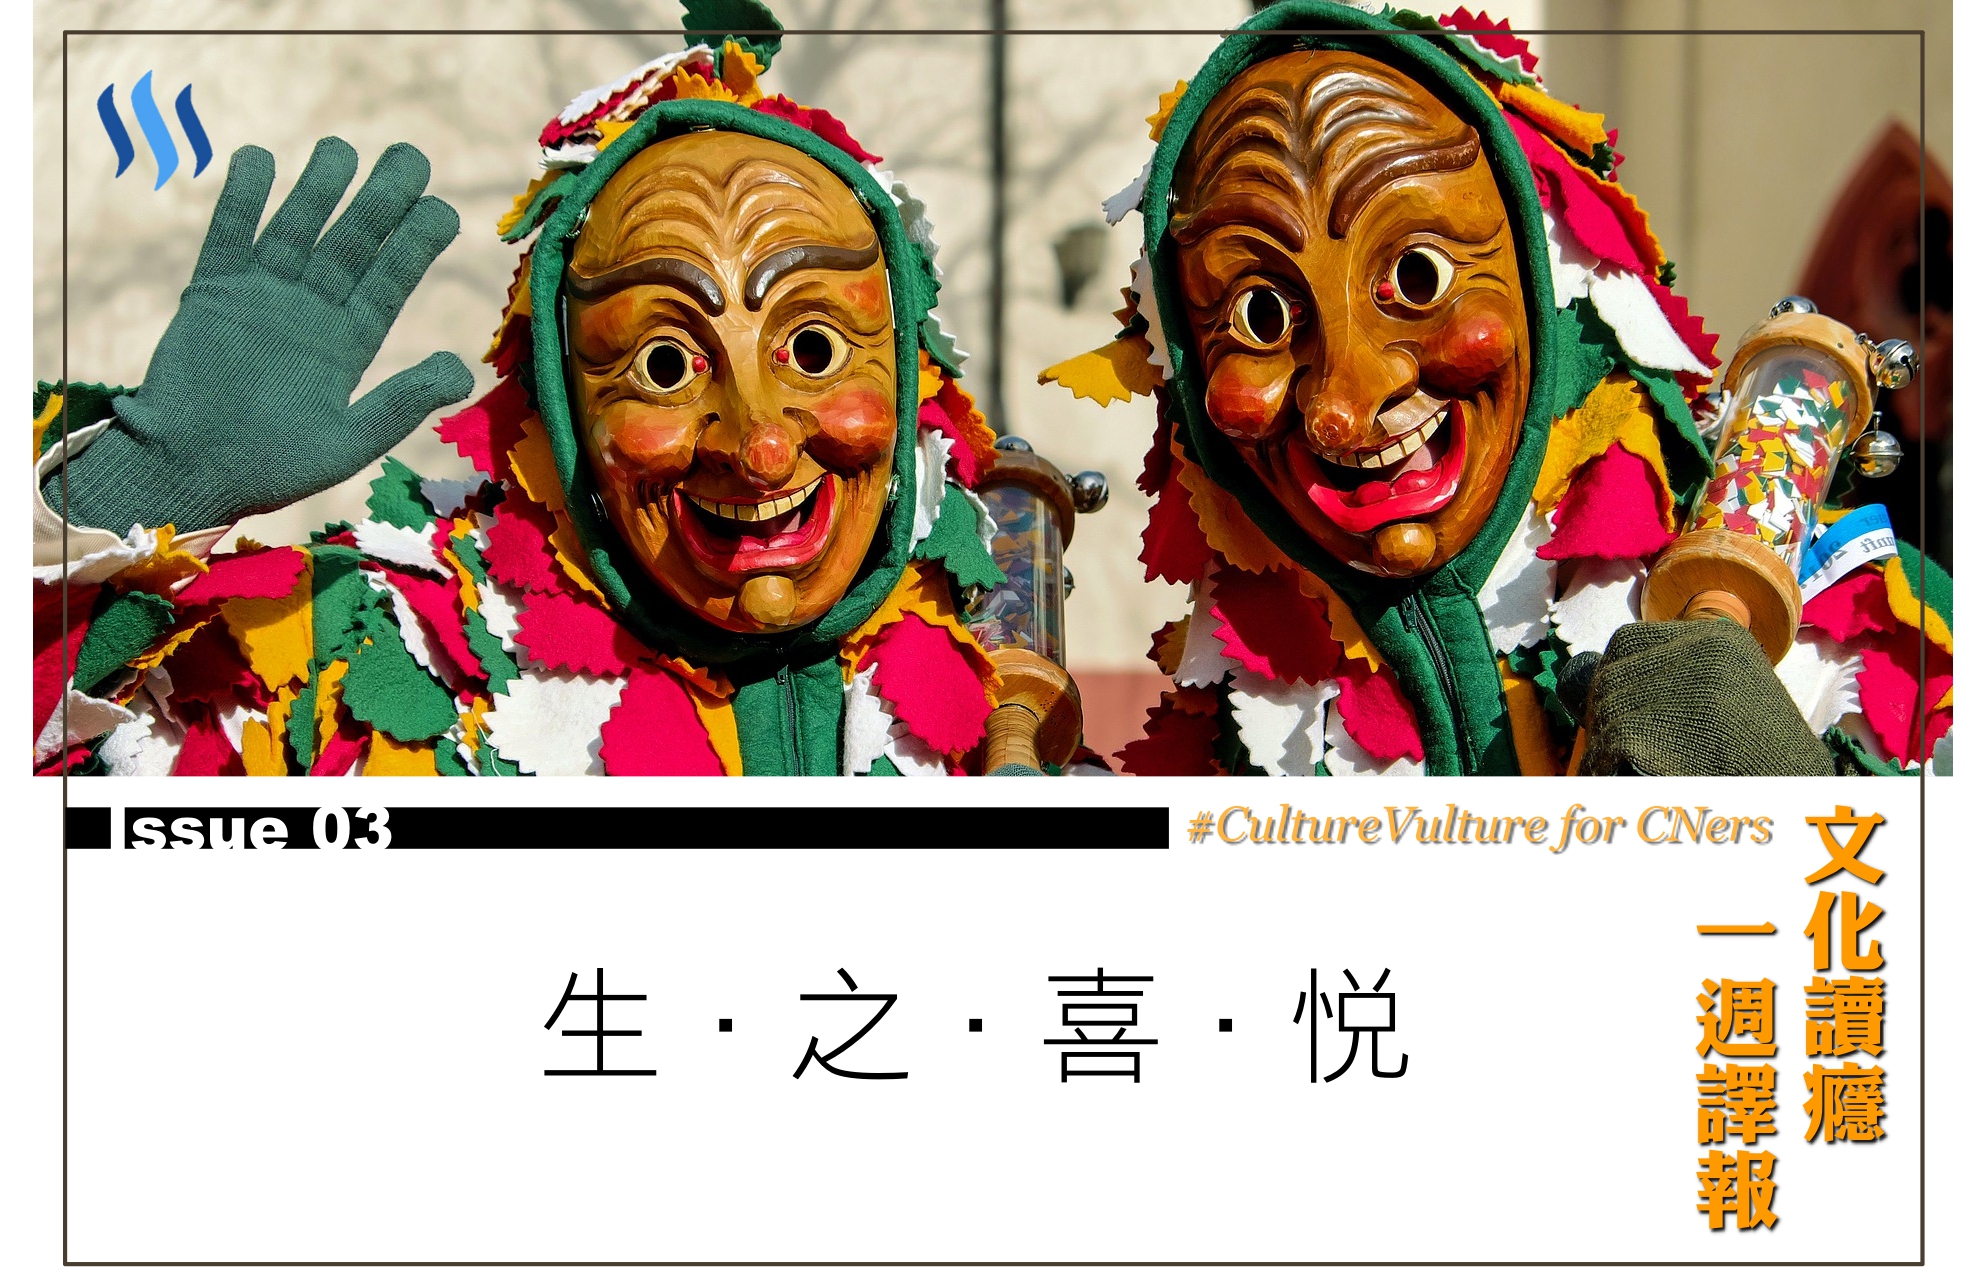 Culture Vulture for CNers Issue 03 ｜《文化讀癮．一週譯報》第3期：生之喜悅